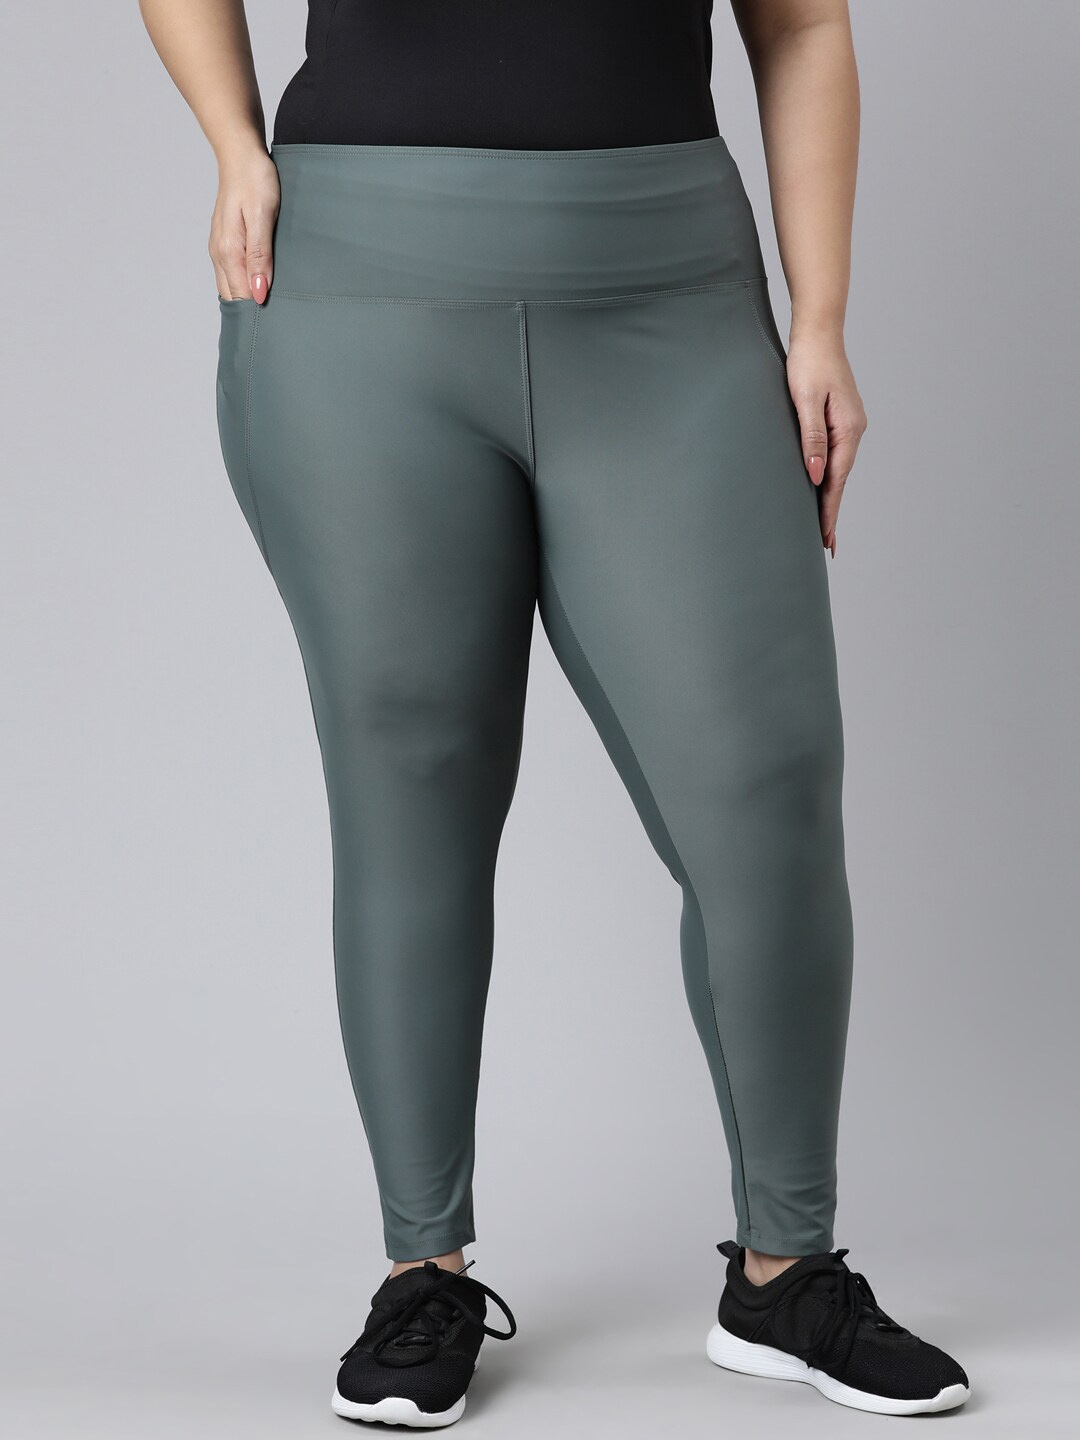 Imperative Crossover Flared Leggings with Phone Pockets, Gym Tights, Yoga  Pants